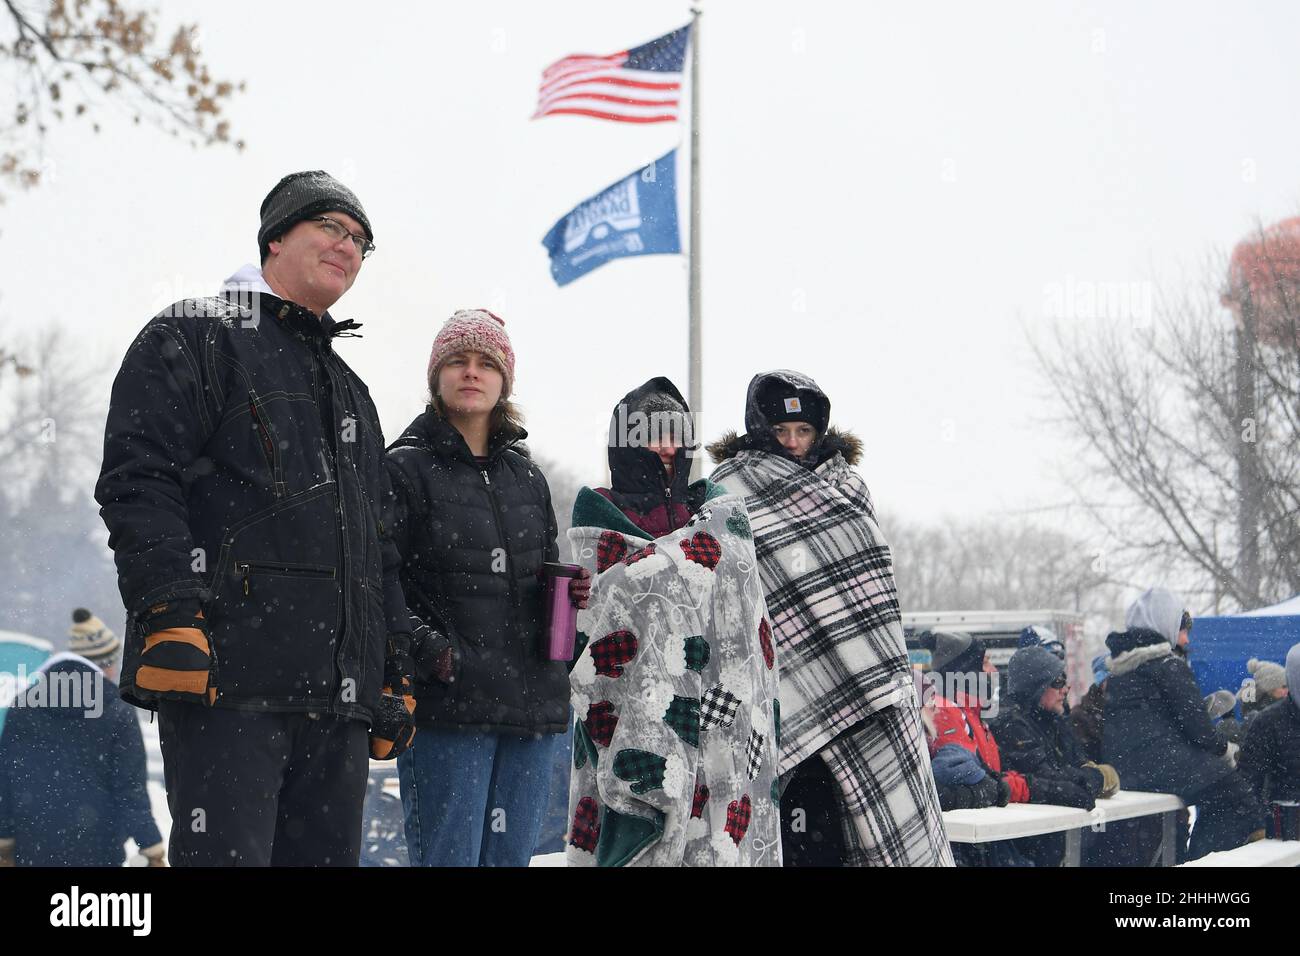 Fans watch the outdoor hockey game in subzero temperatures during the 3rd annual Hockey Day North Dakota outdoor hockey event in Jamestown, ND. Youth, high school and college hockey teams from around North Dakota competed over two days. By Russell Hons/CSM Stock Photo